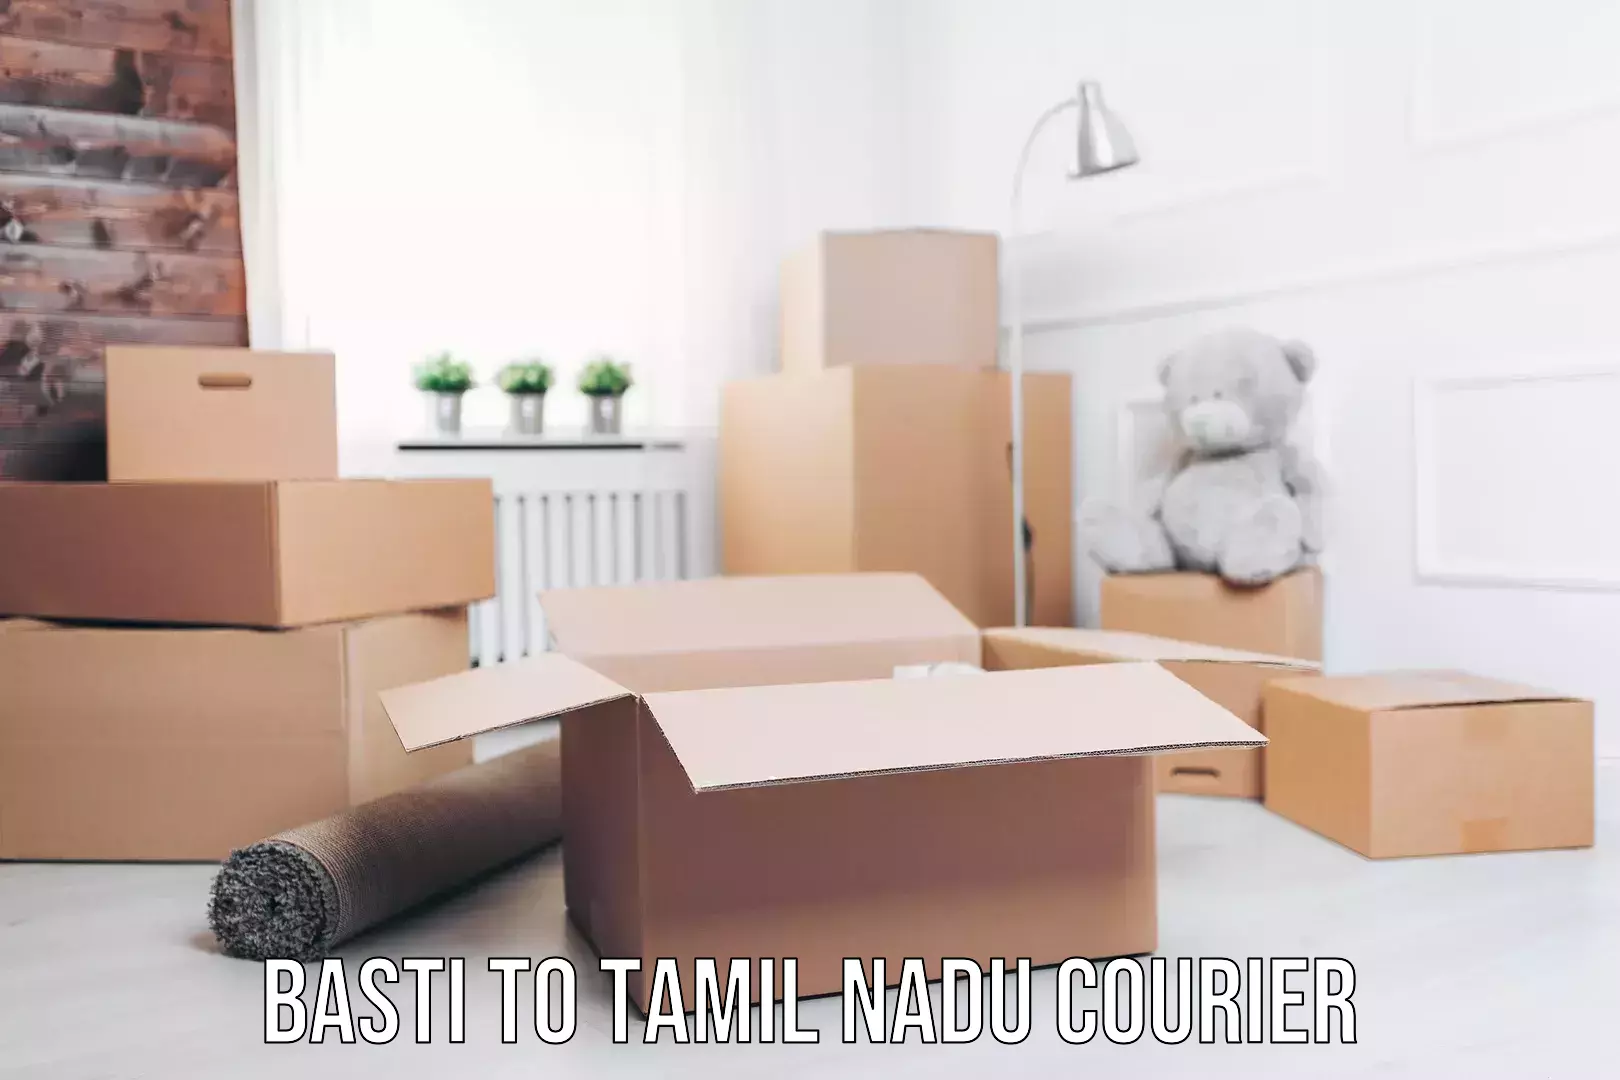 Corporate courier solutions Basti to Tamil Nadu